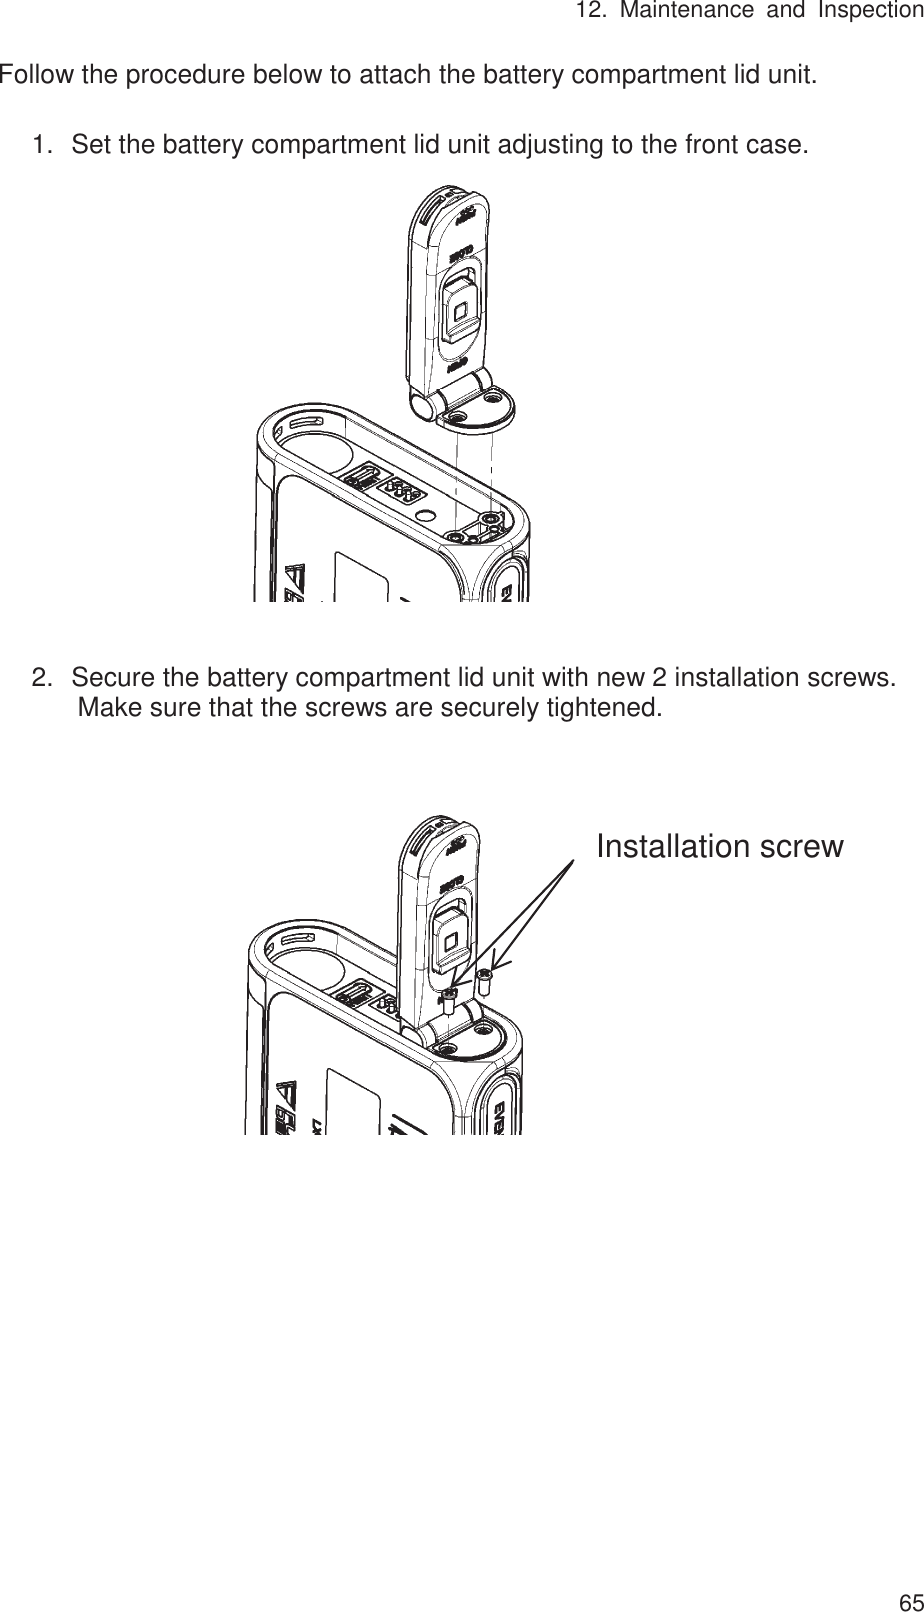 12. Maintenance and Inspection 65Follow the procedure below to attach the battery compartment lid unit.  1.㻌Set the battery compartment lid unit adjusting to the front case.                 2.㻌Secure the battery compartment lid unit with new 2 installation screws. Make sure that the screws are securely tightened.                            Installation screw 